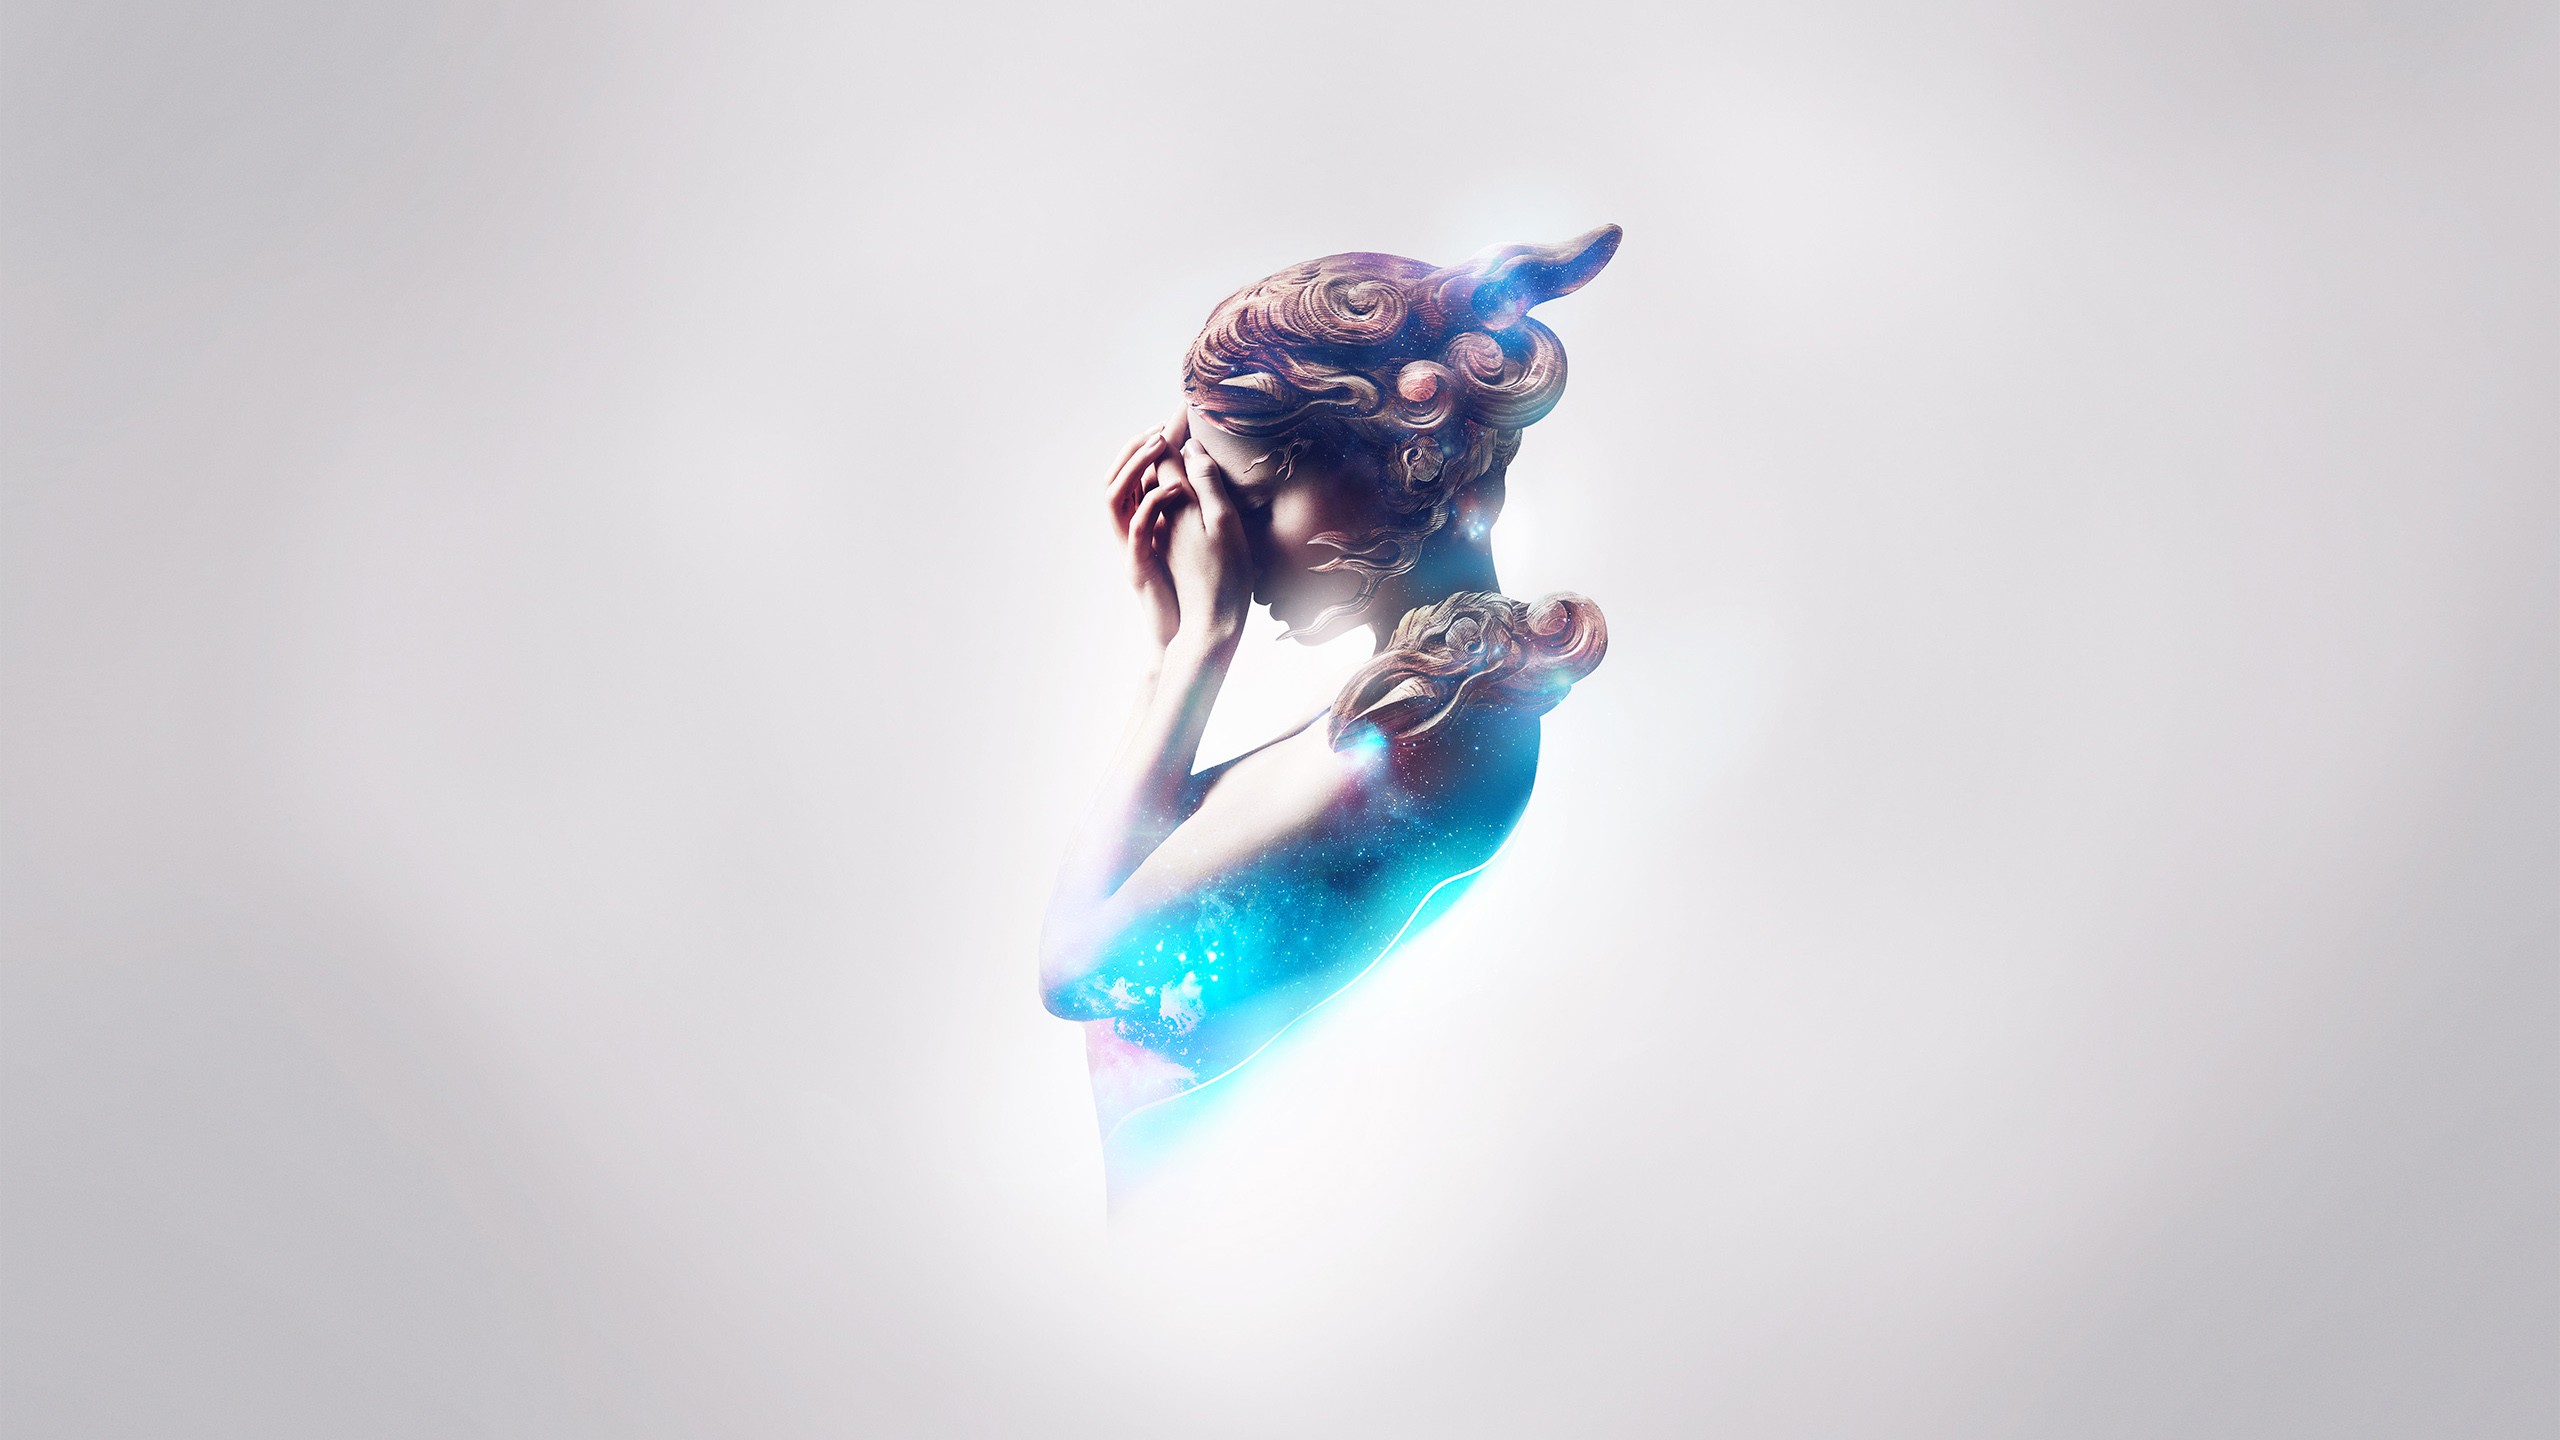 mood wallpaper download,blue,fictional character,photography,animation,illustration